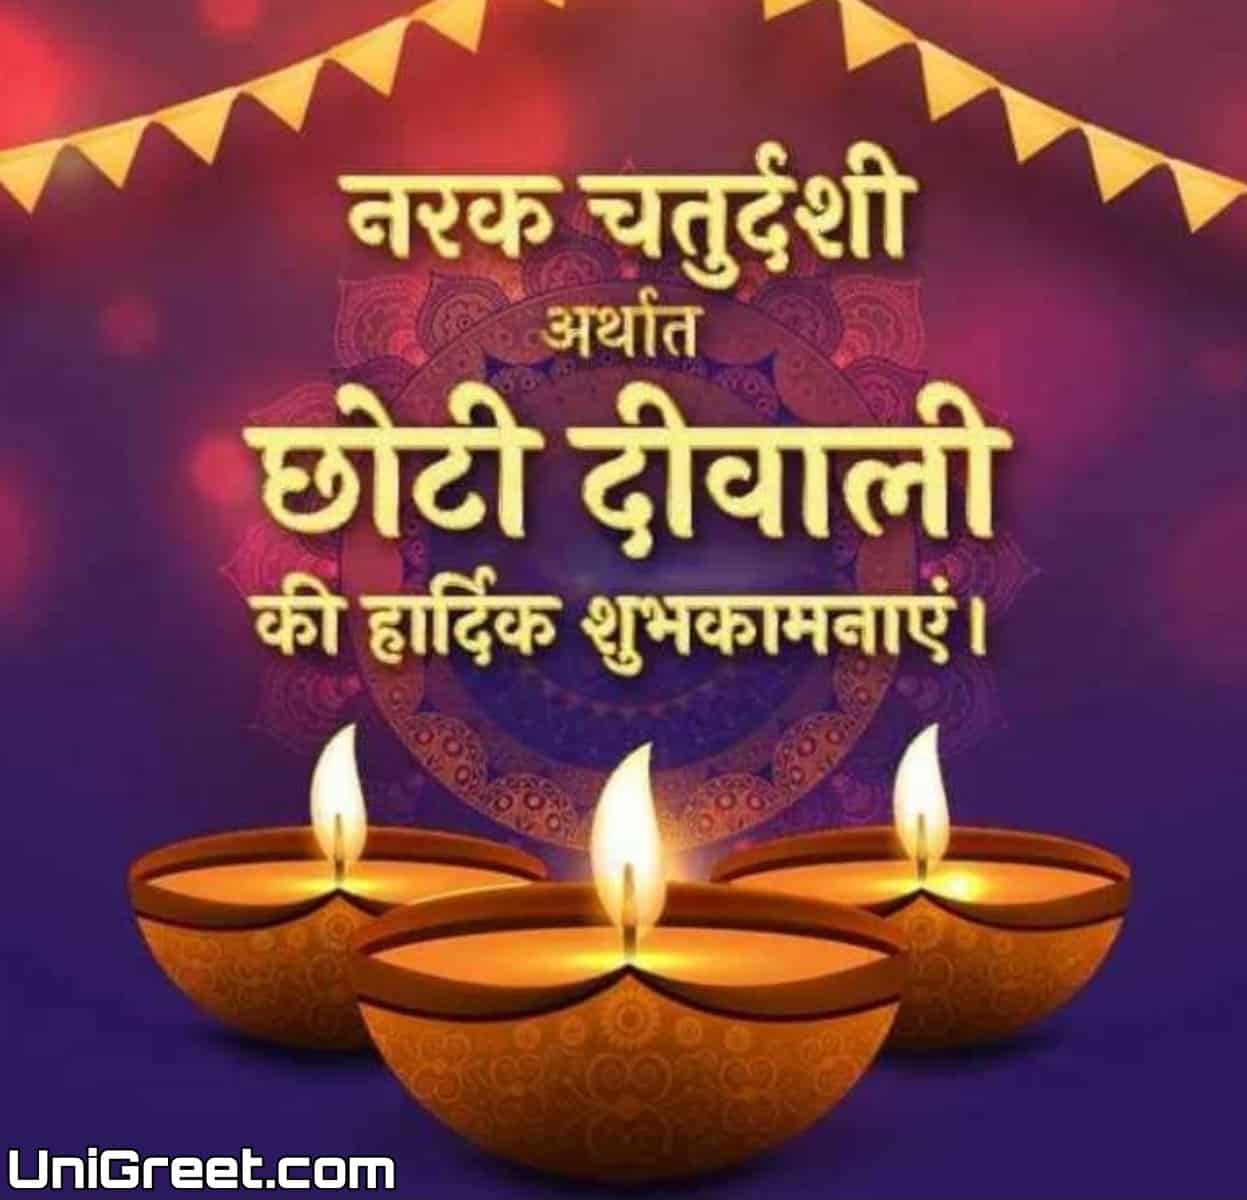 BEST Happy Choti Diwali Wishes Images Pics Download